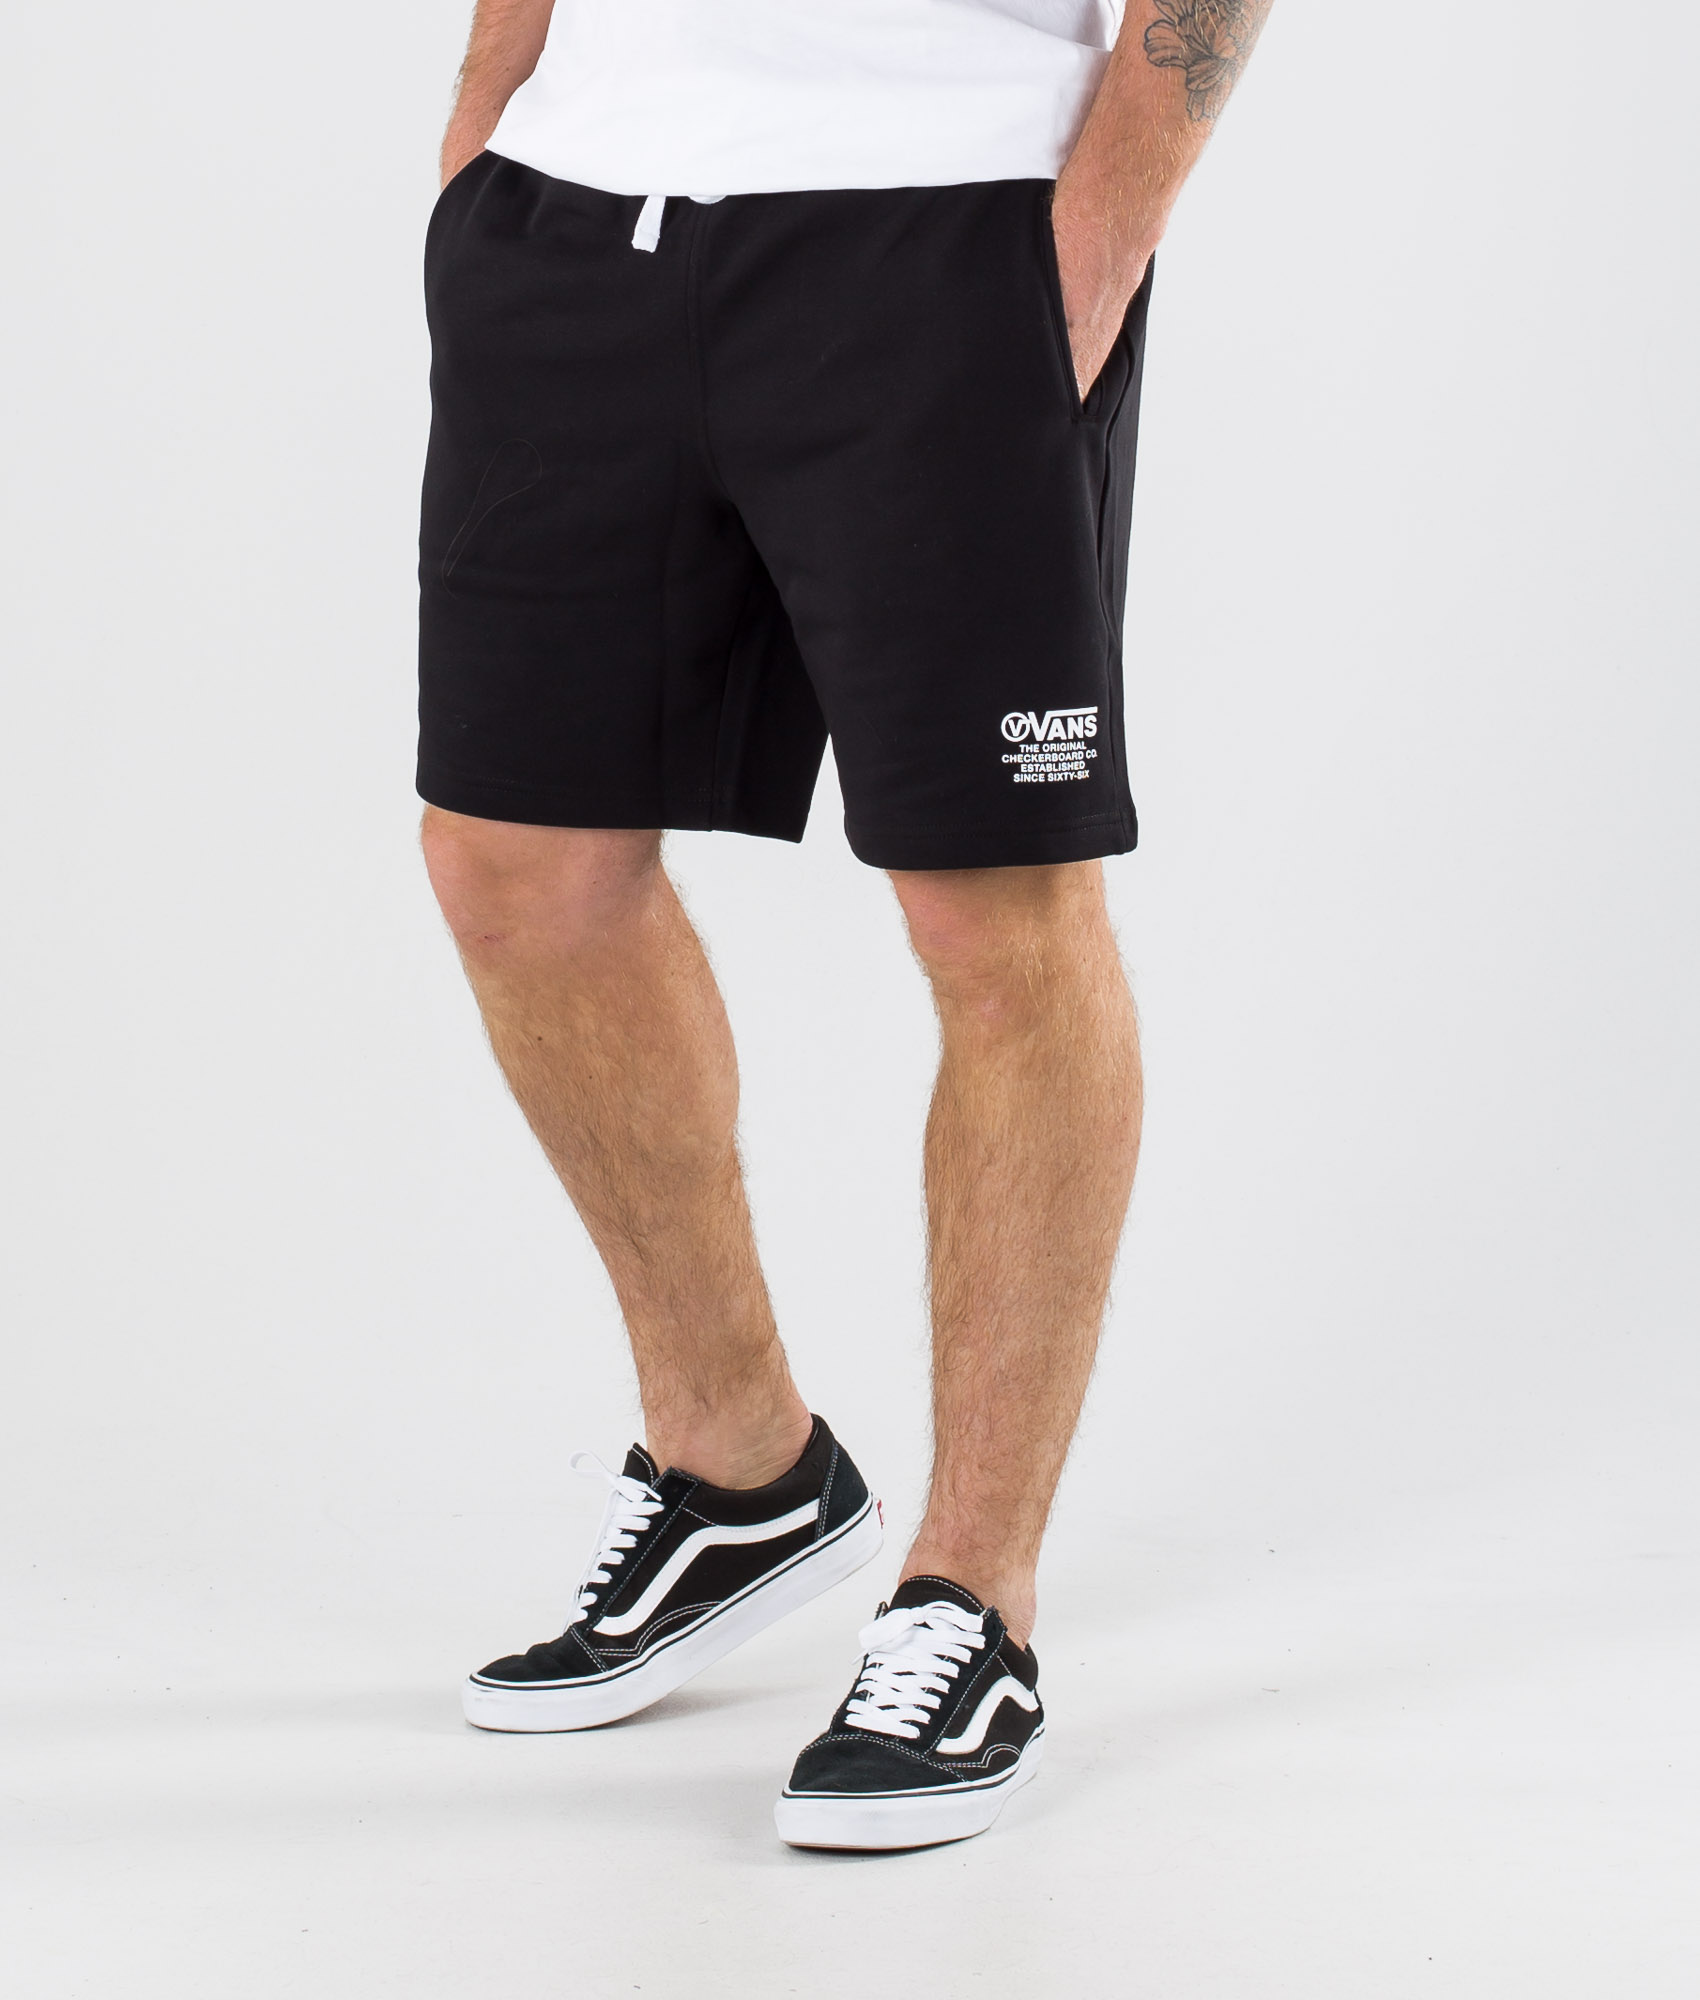 slip on vans with shorts